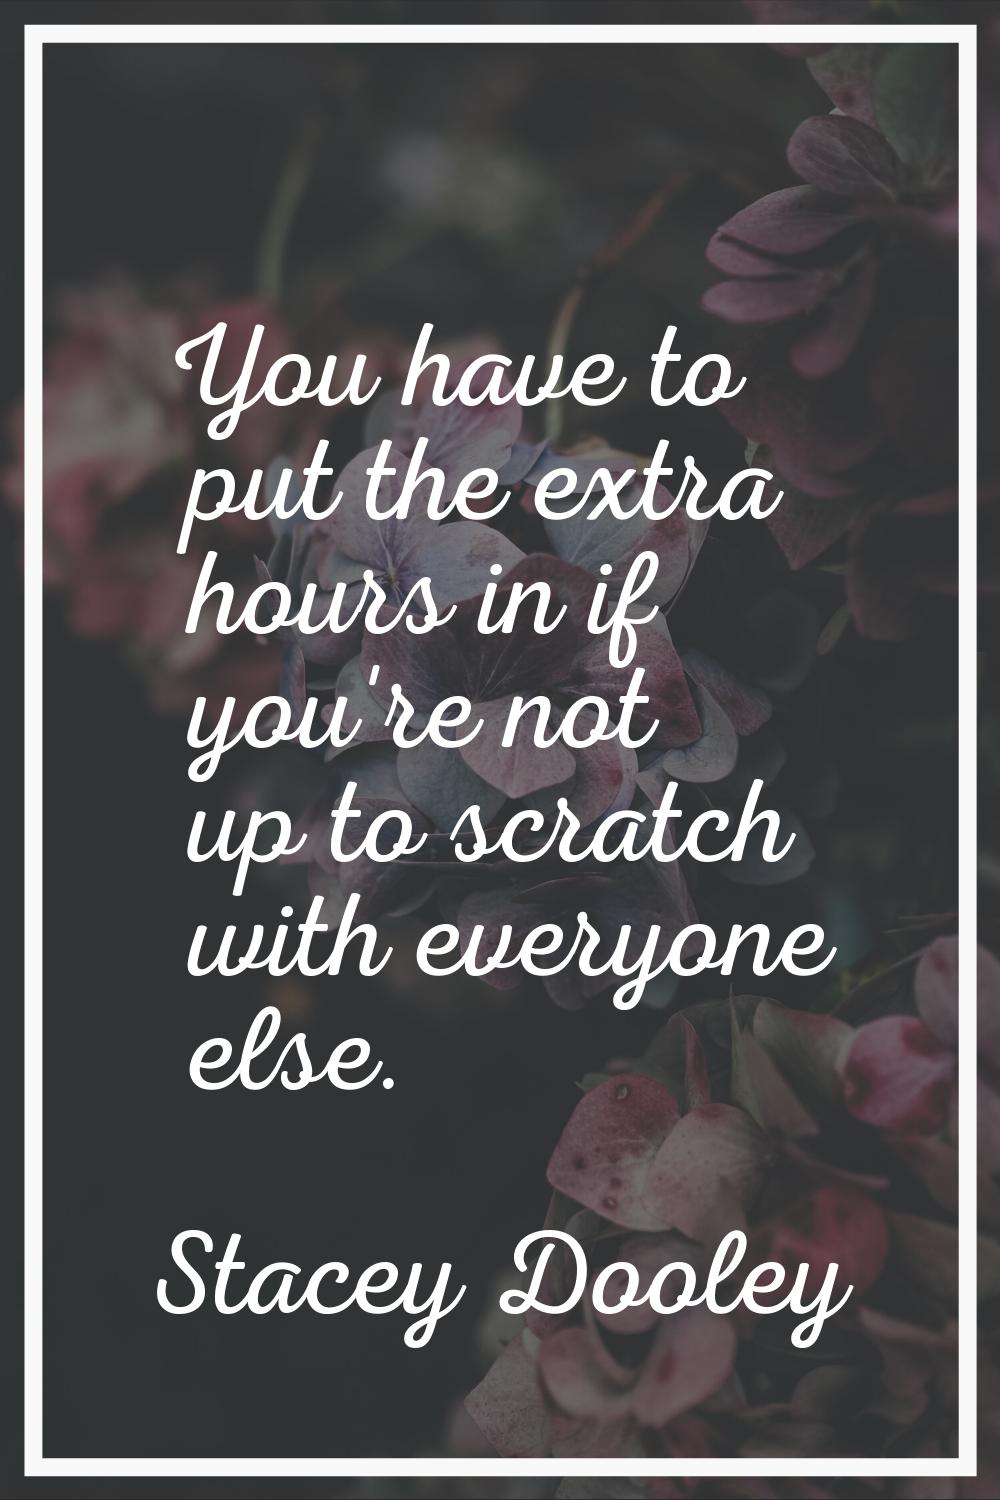 You have to put the extra hours in if you're not up to scratch with everyone else.